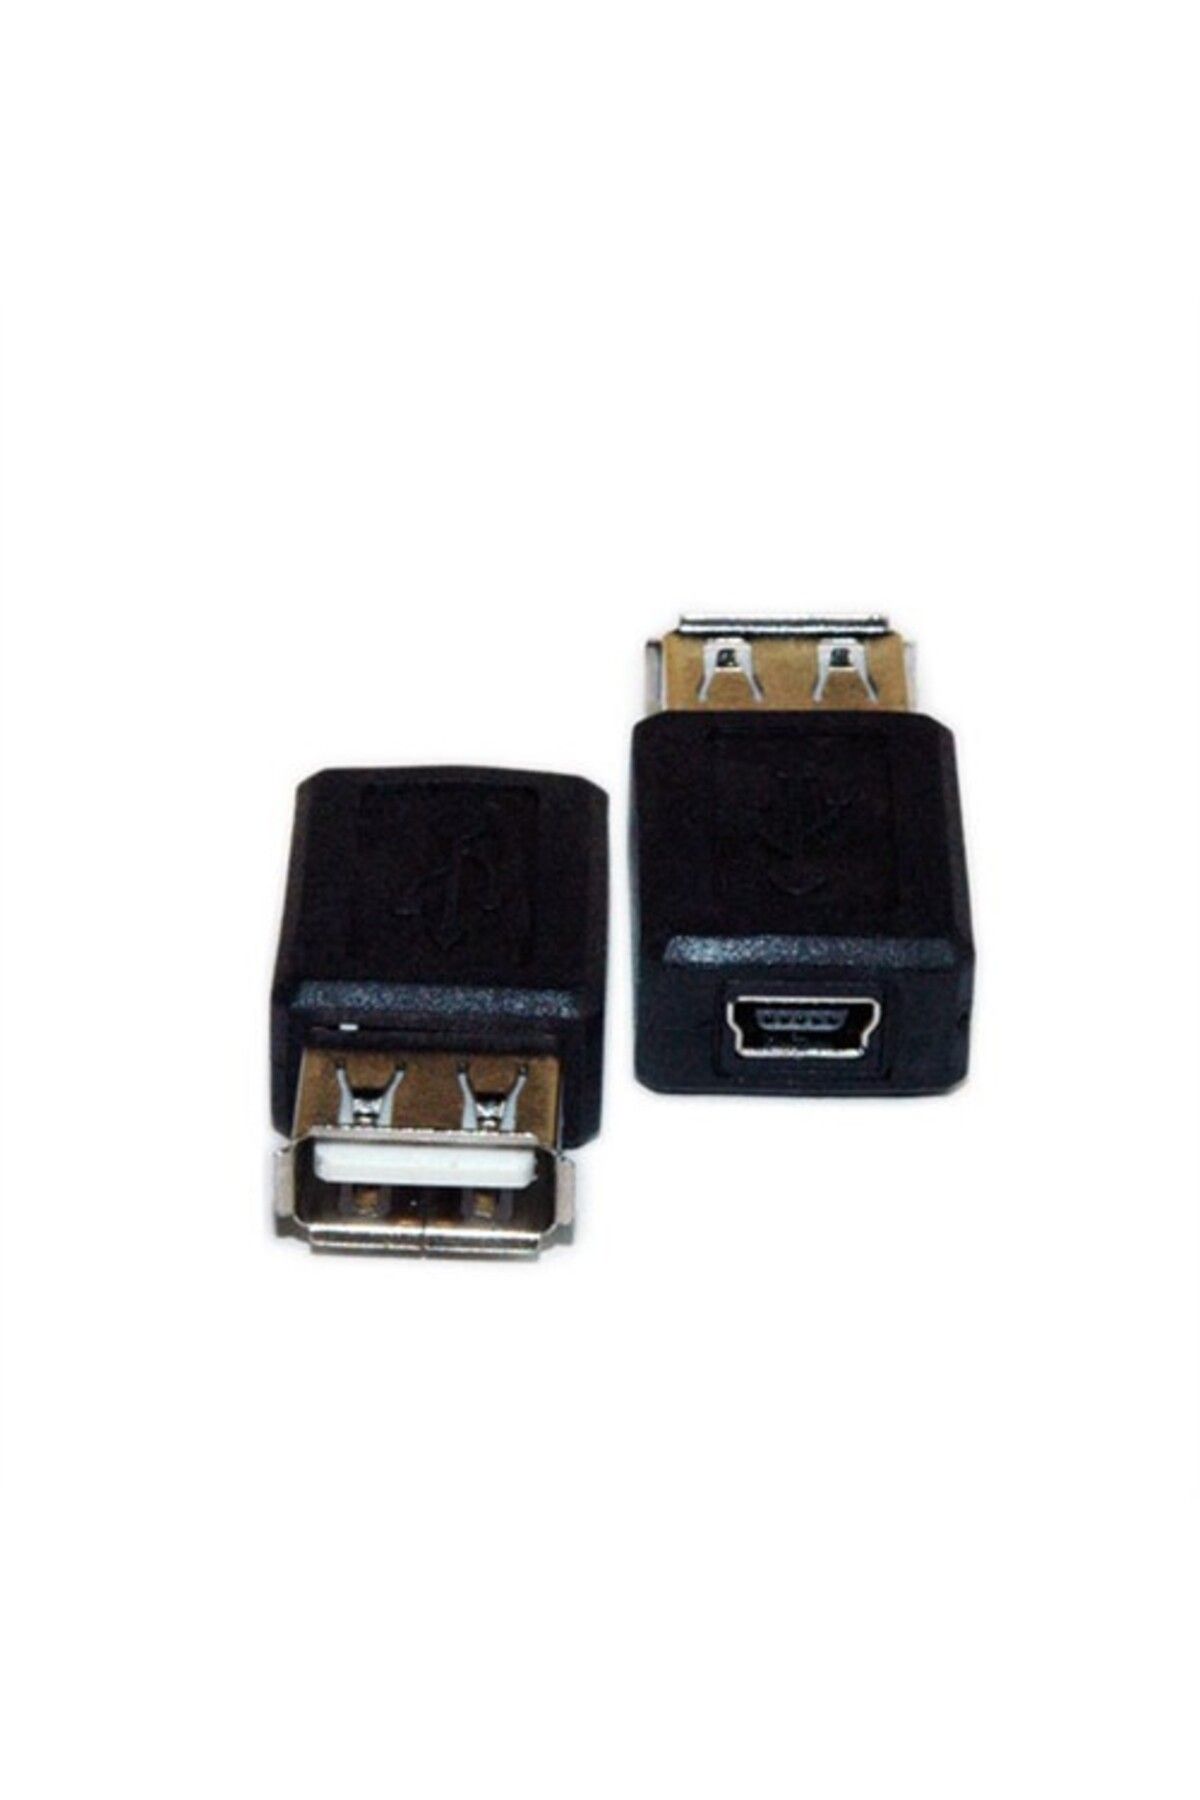 KEEPRO Ti-mesh Usb 2.0 Type A Female To B Mini 5 Pins Female Kablo Connector Converter Adapter